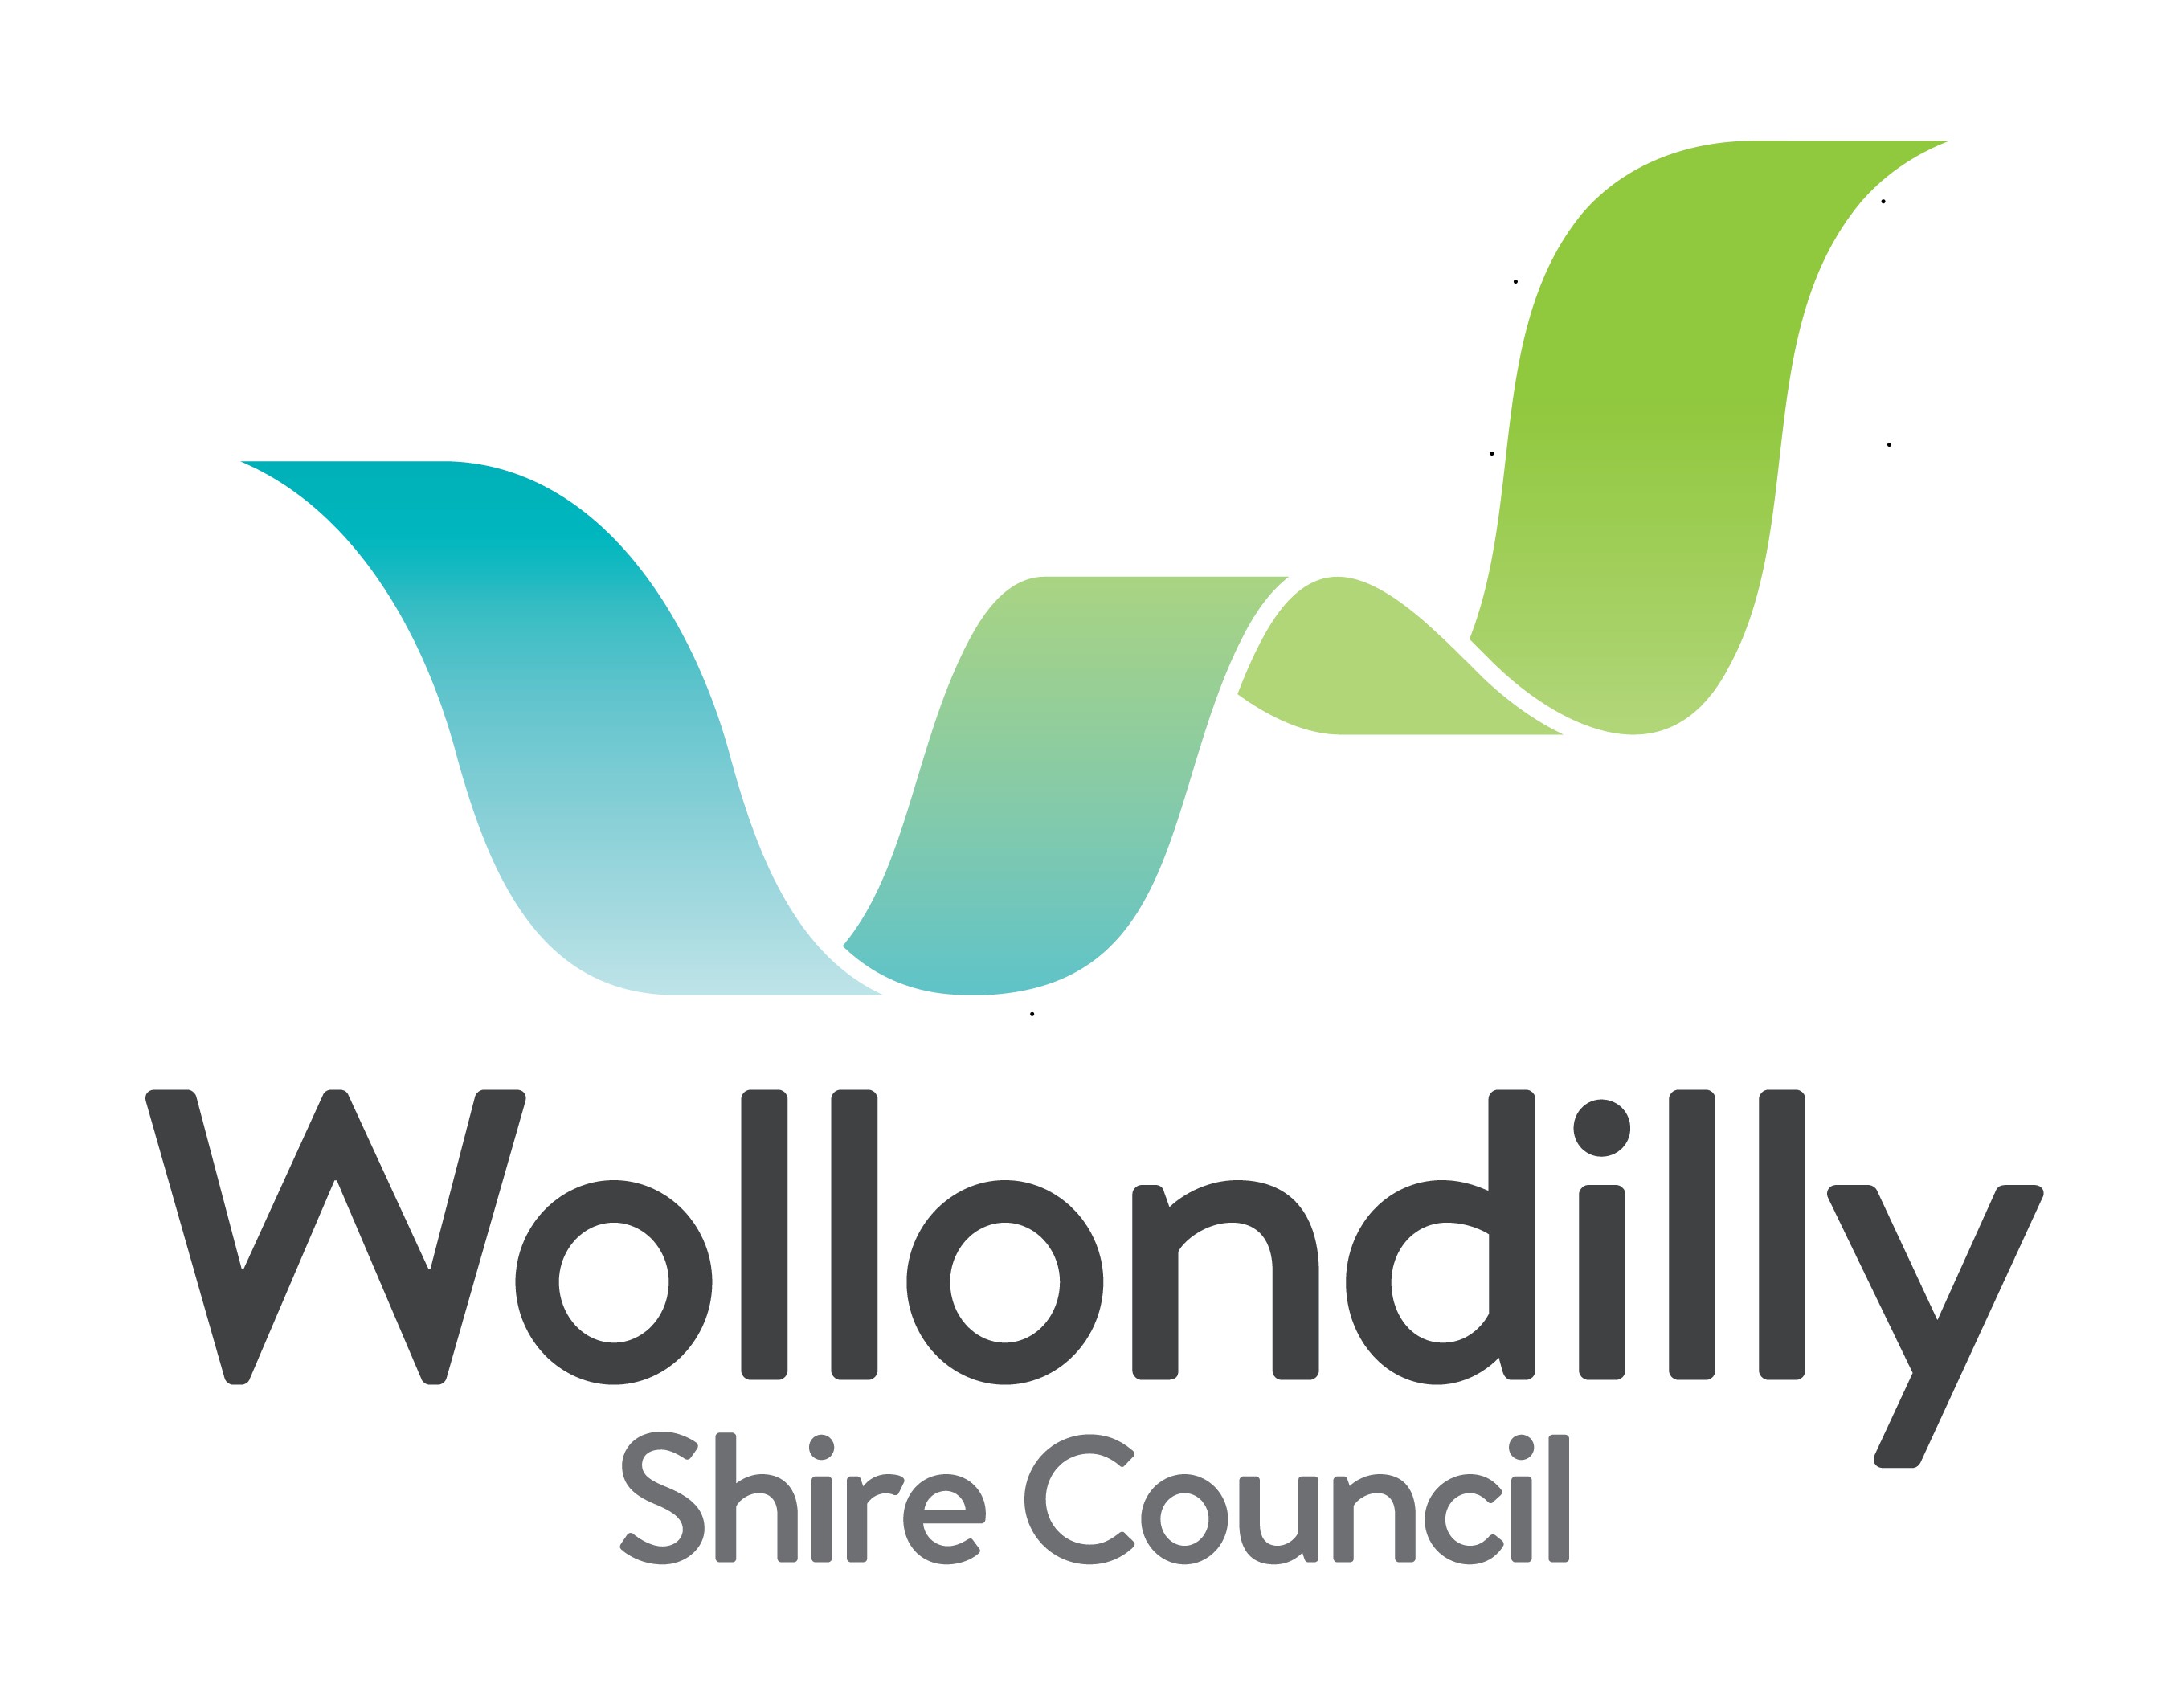 Wollondilly Shire Council logo